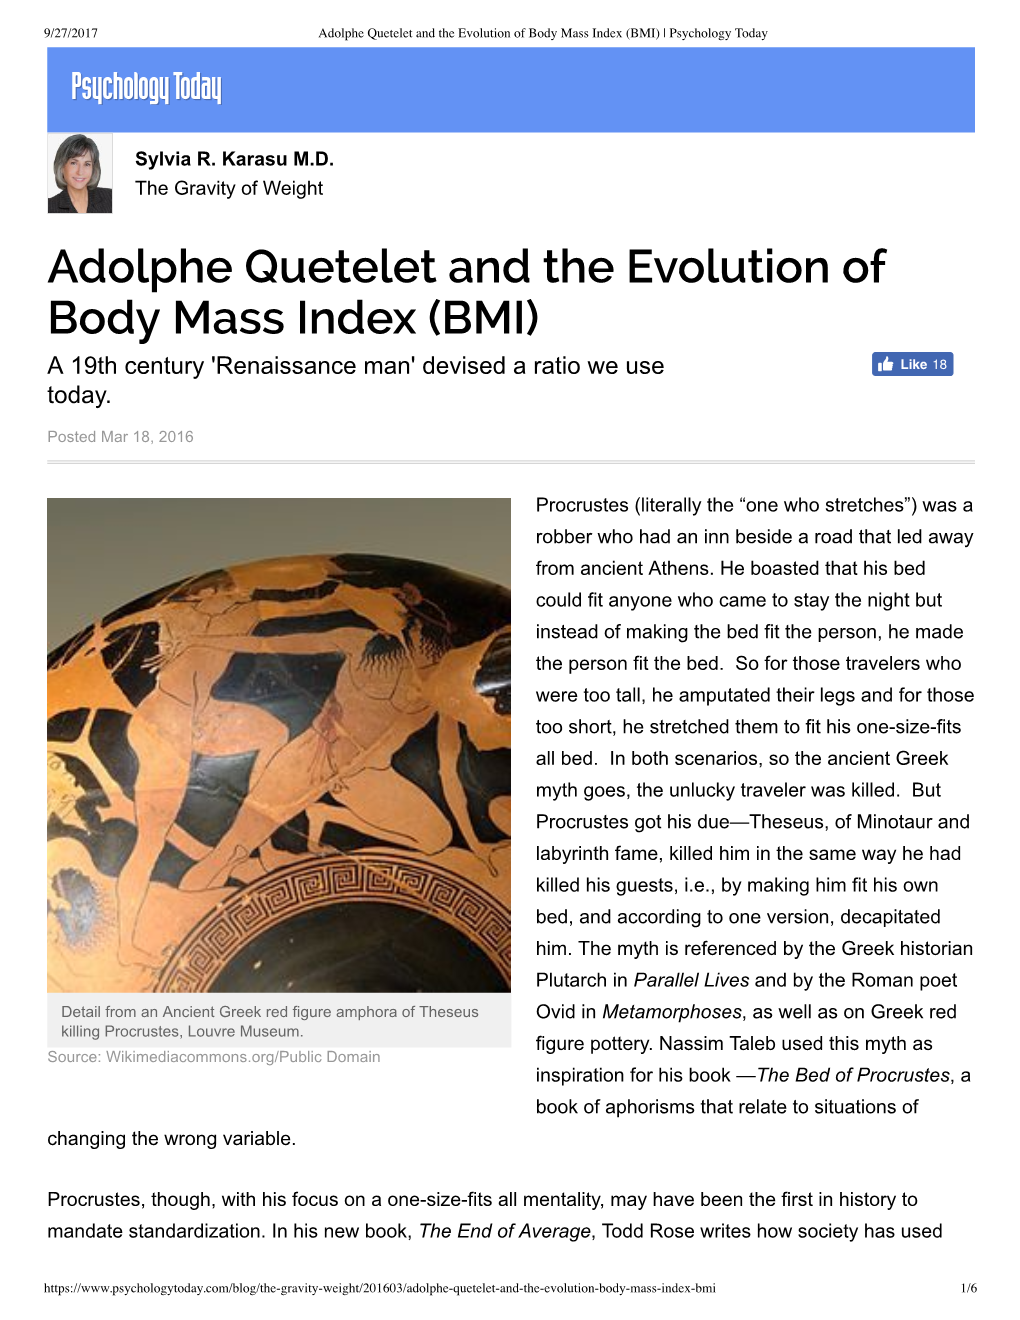 Adolphe Quetelet and the Evolution of Body Mass Index (BMI) | Psychology Today